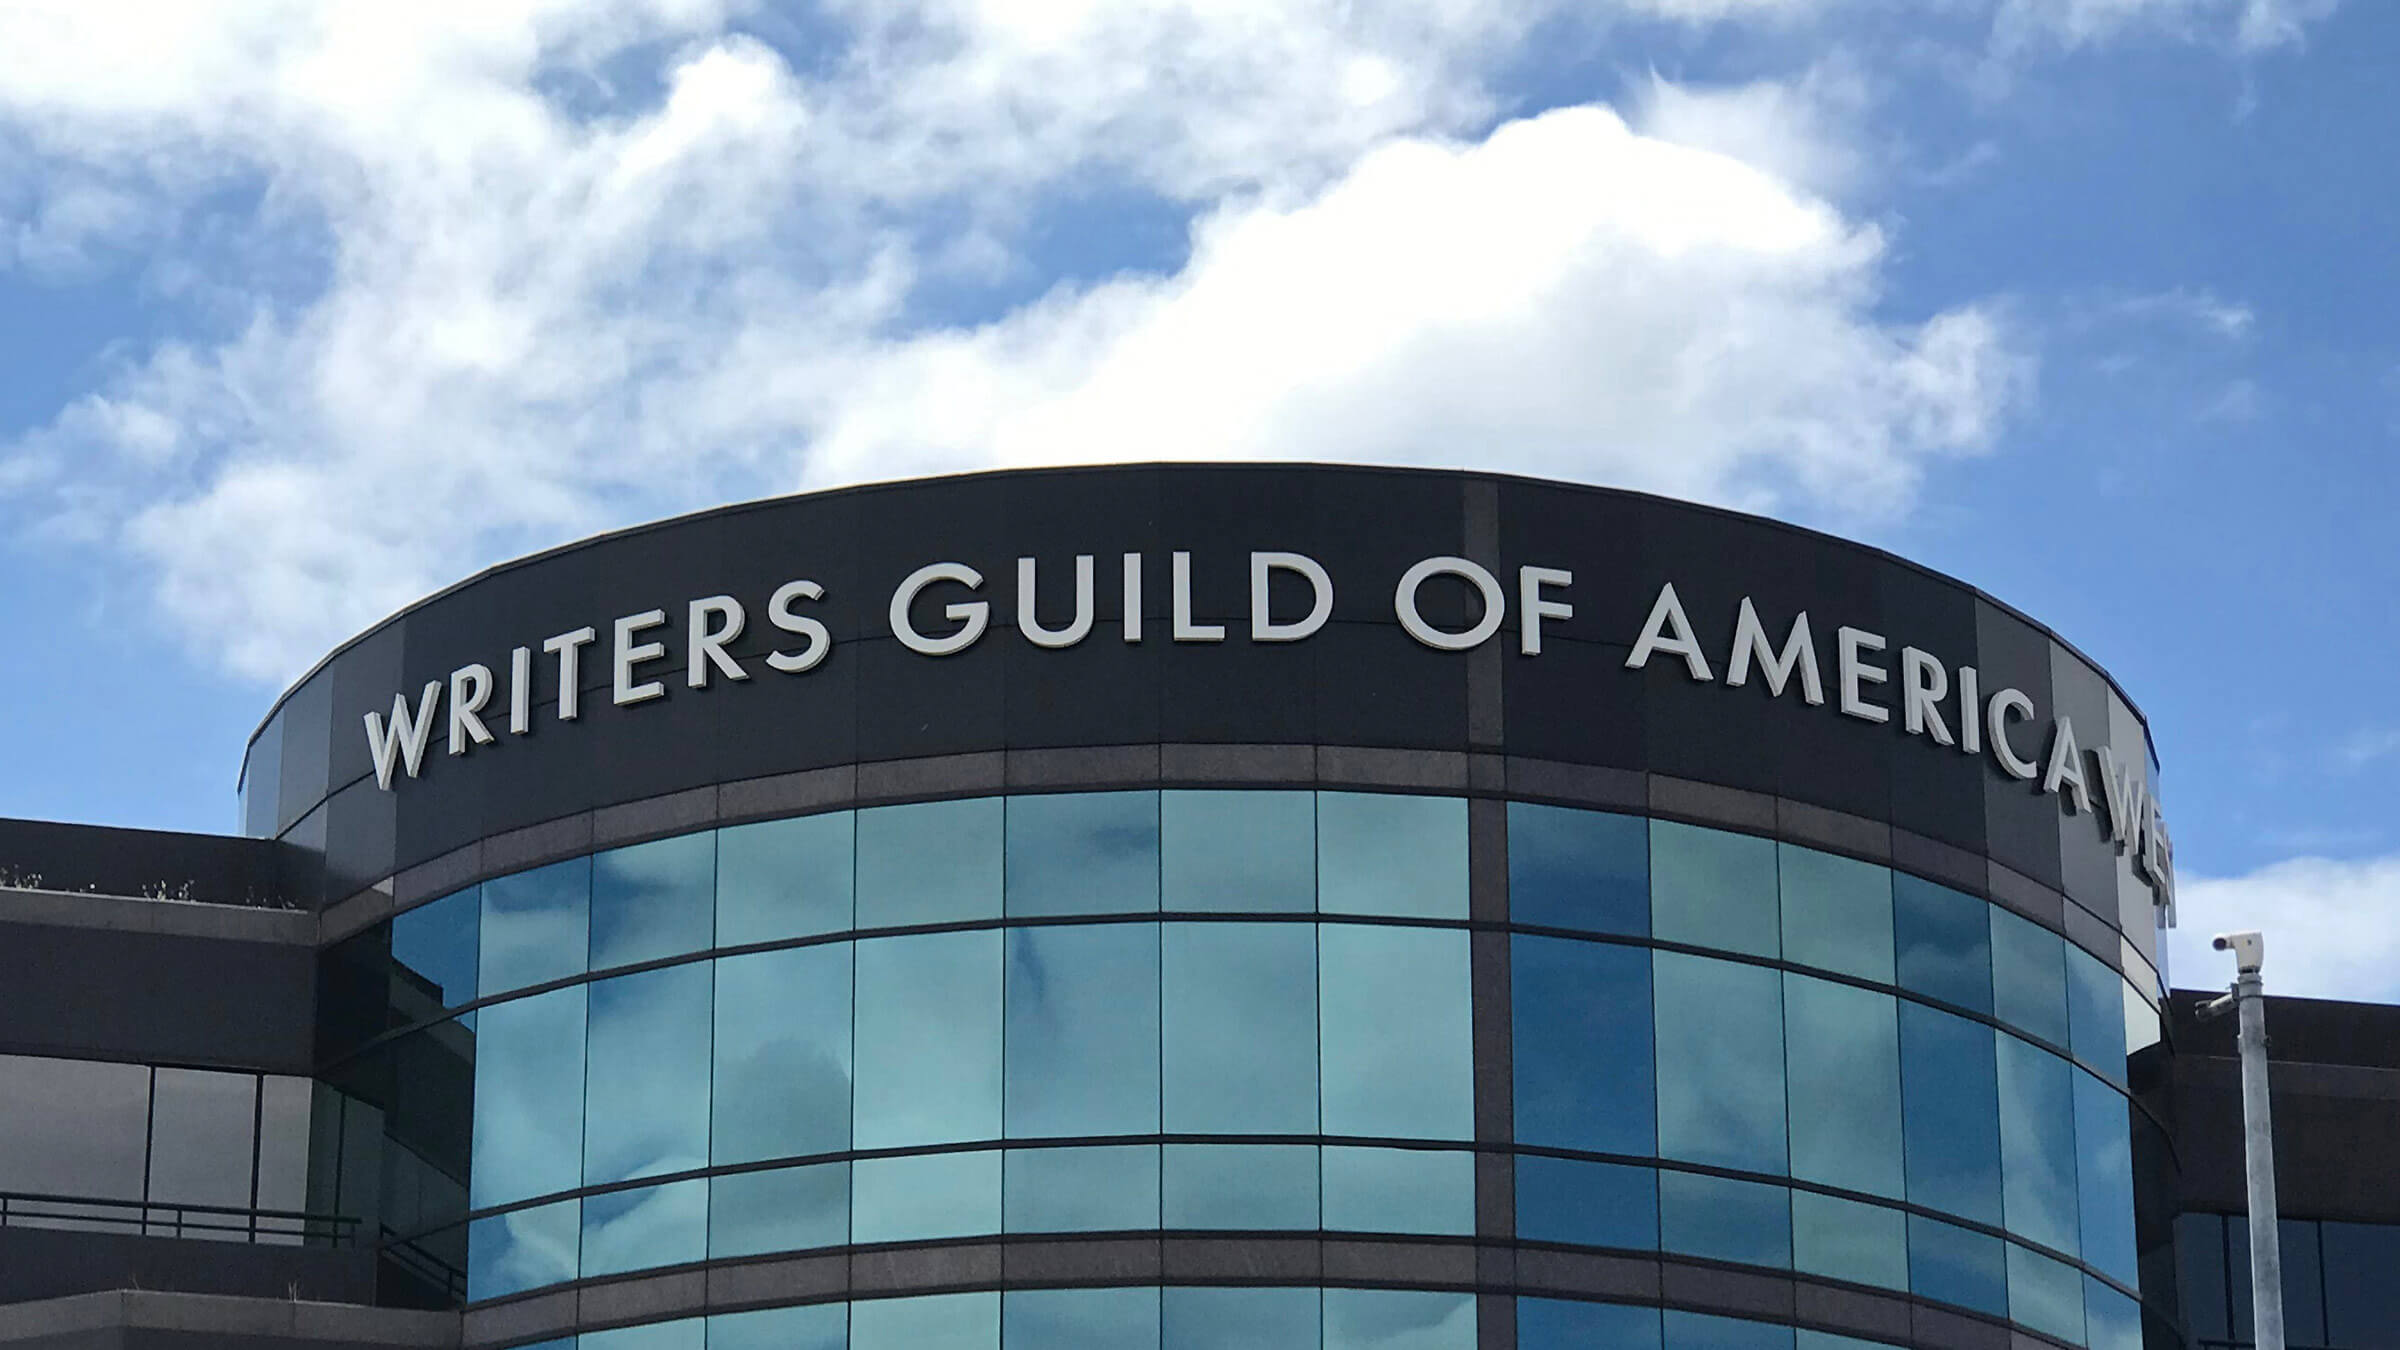 The History of the WGA